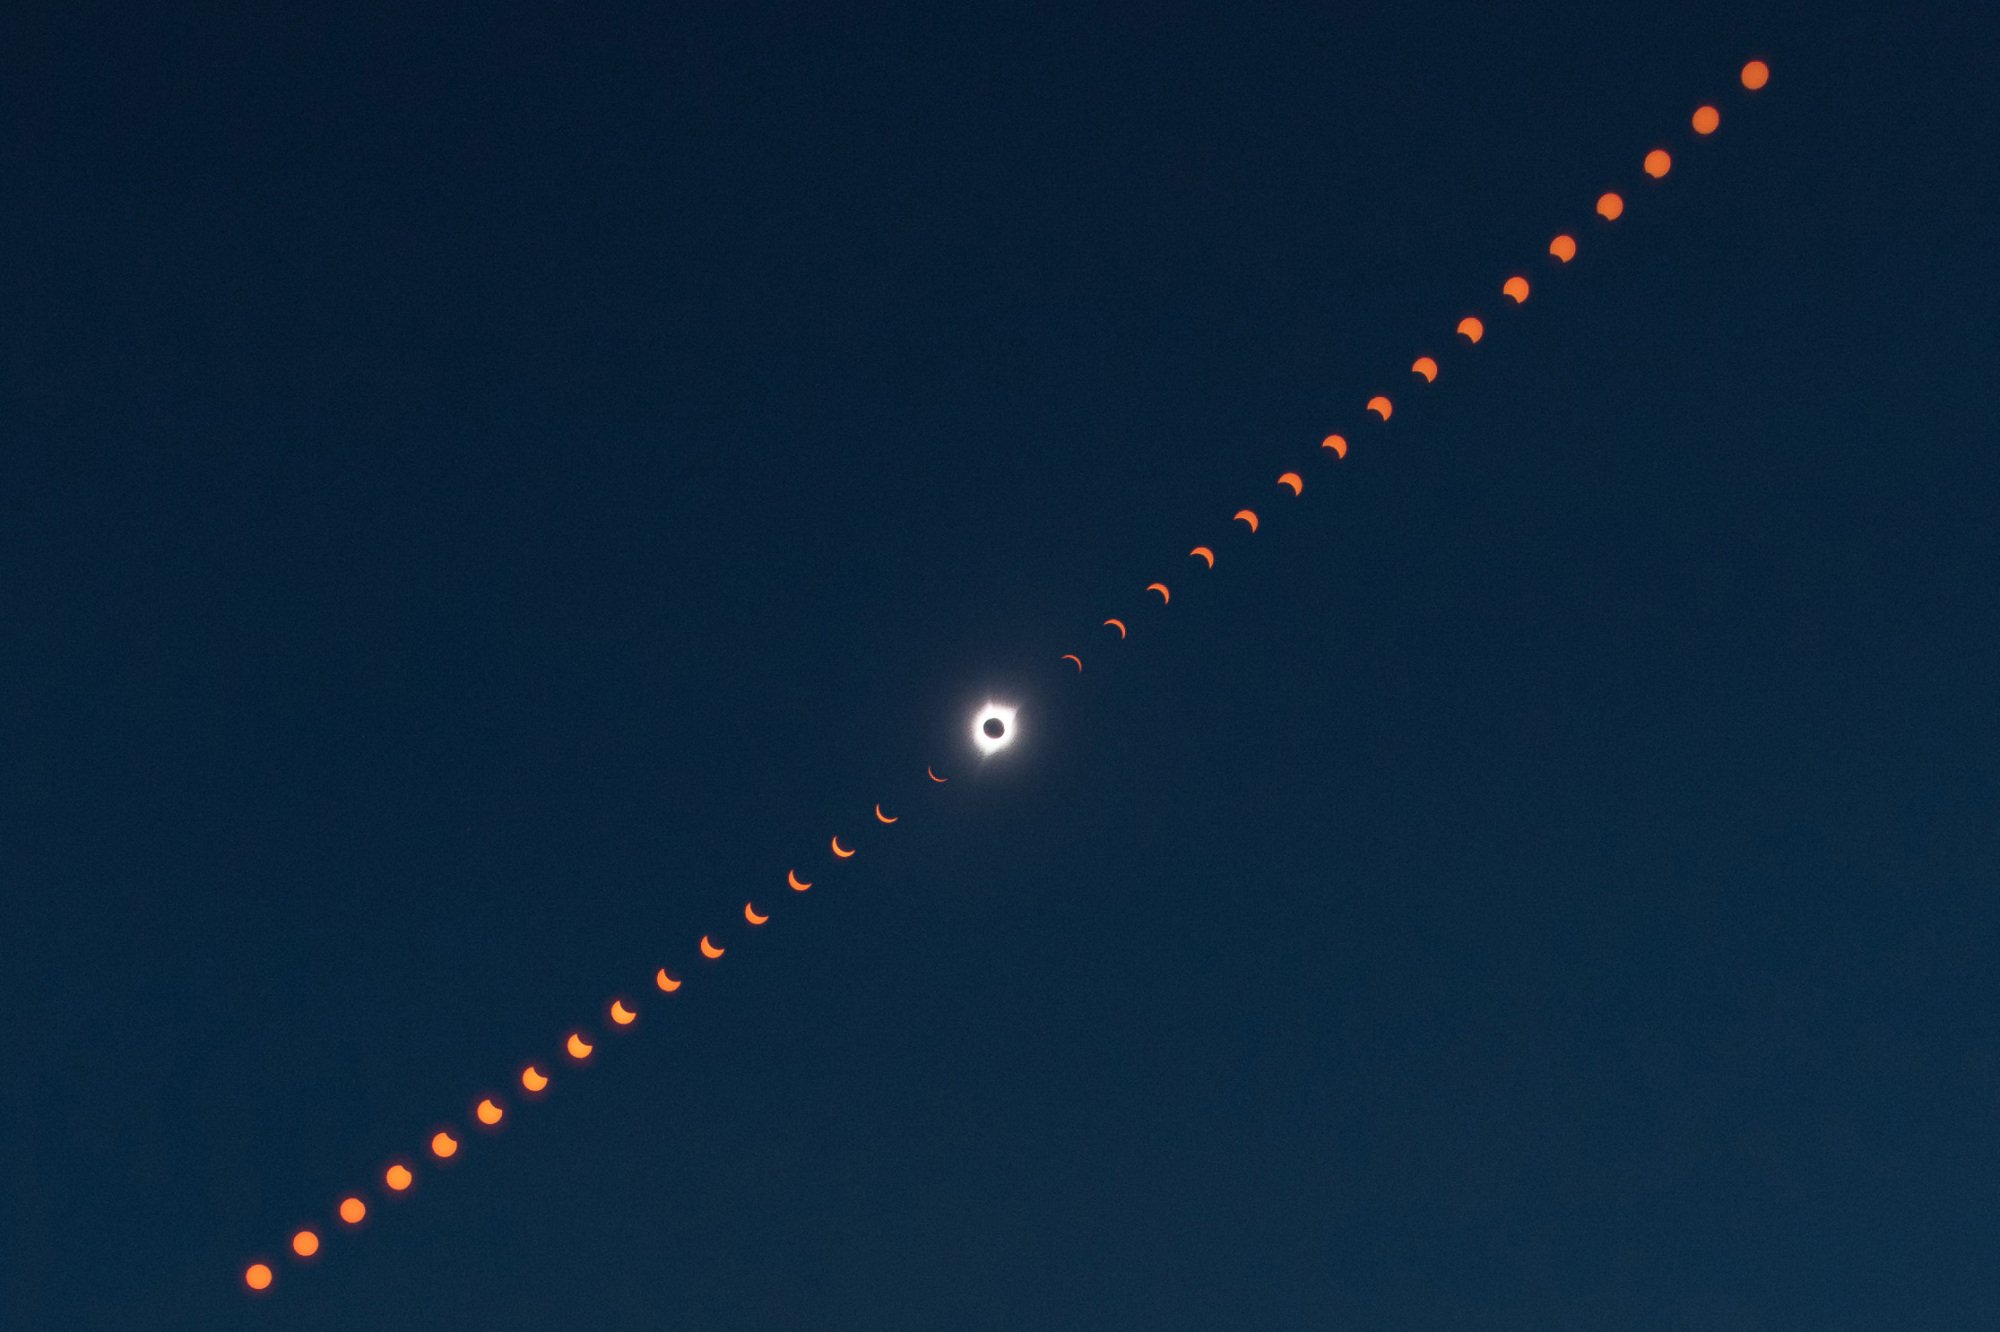 A composite image showing the progression of the total solar eclipse from partial to totality, and again to partial.